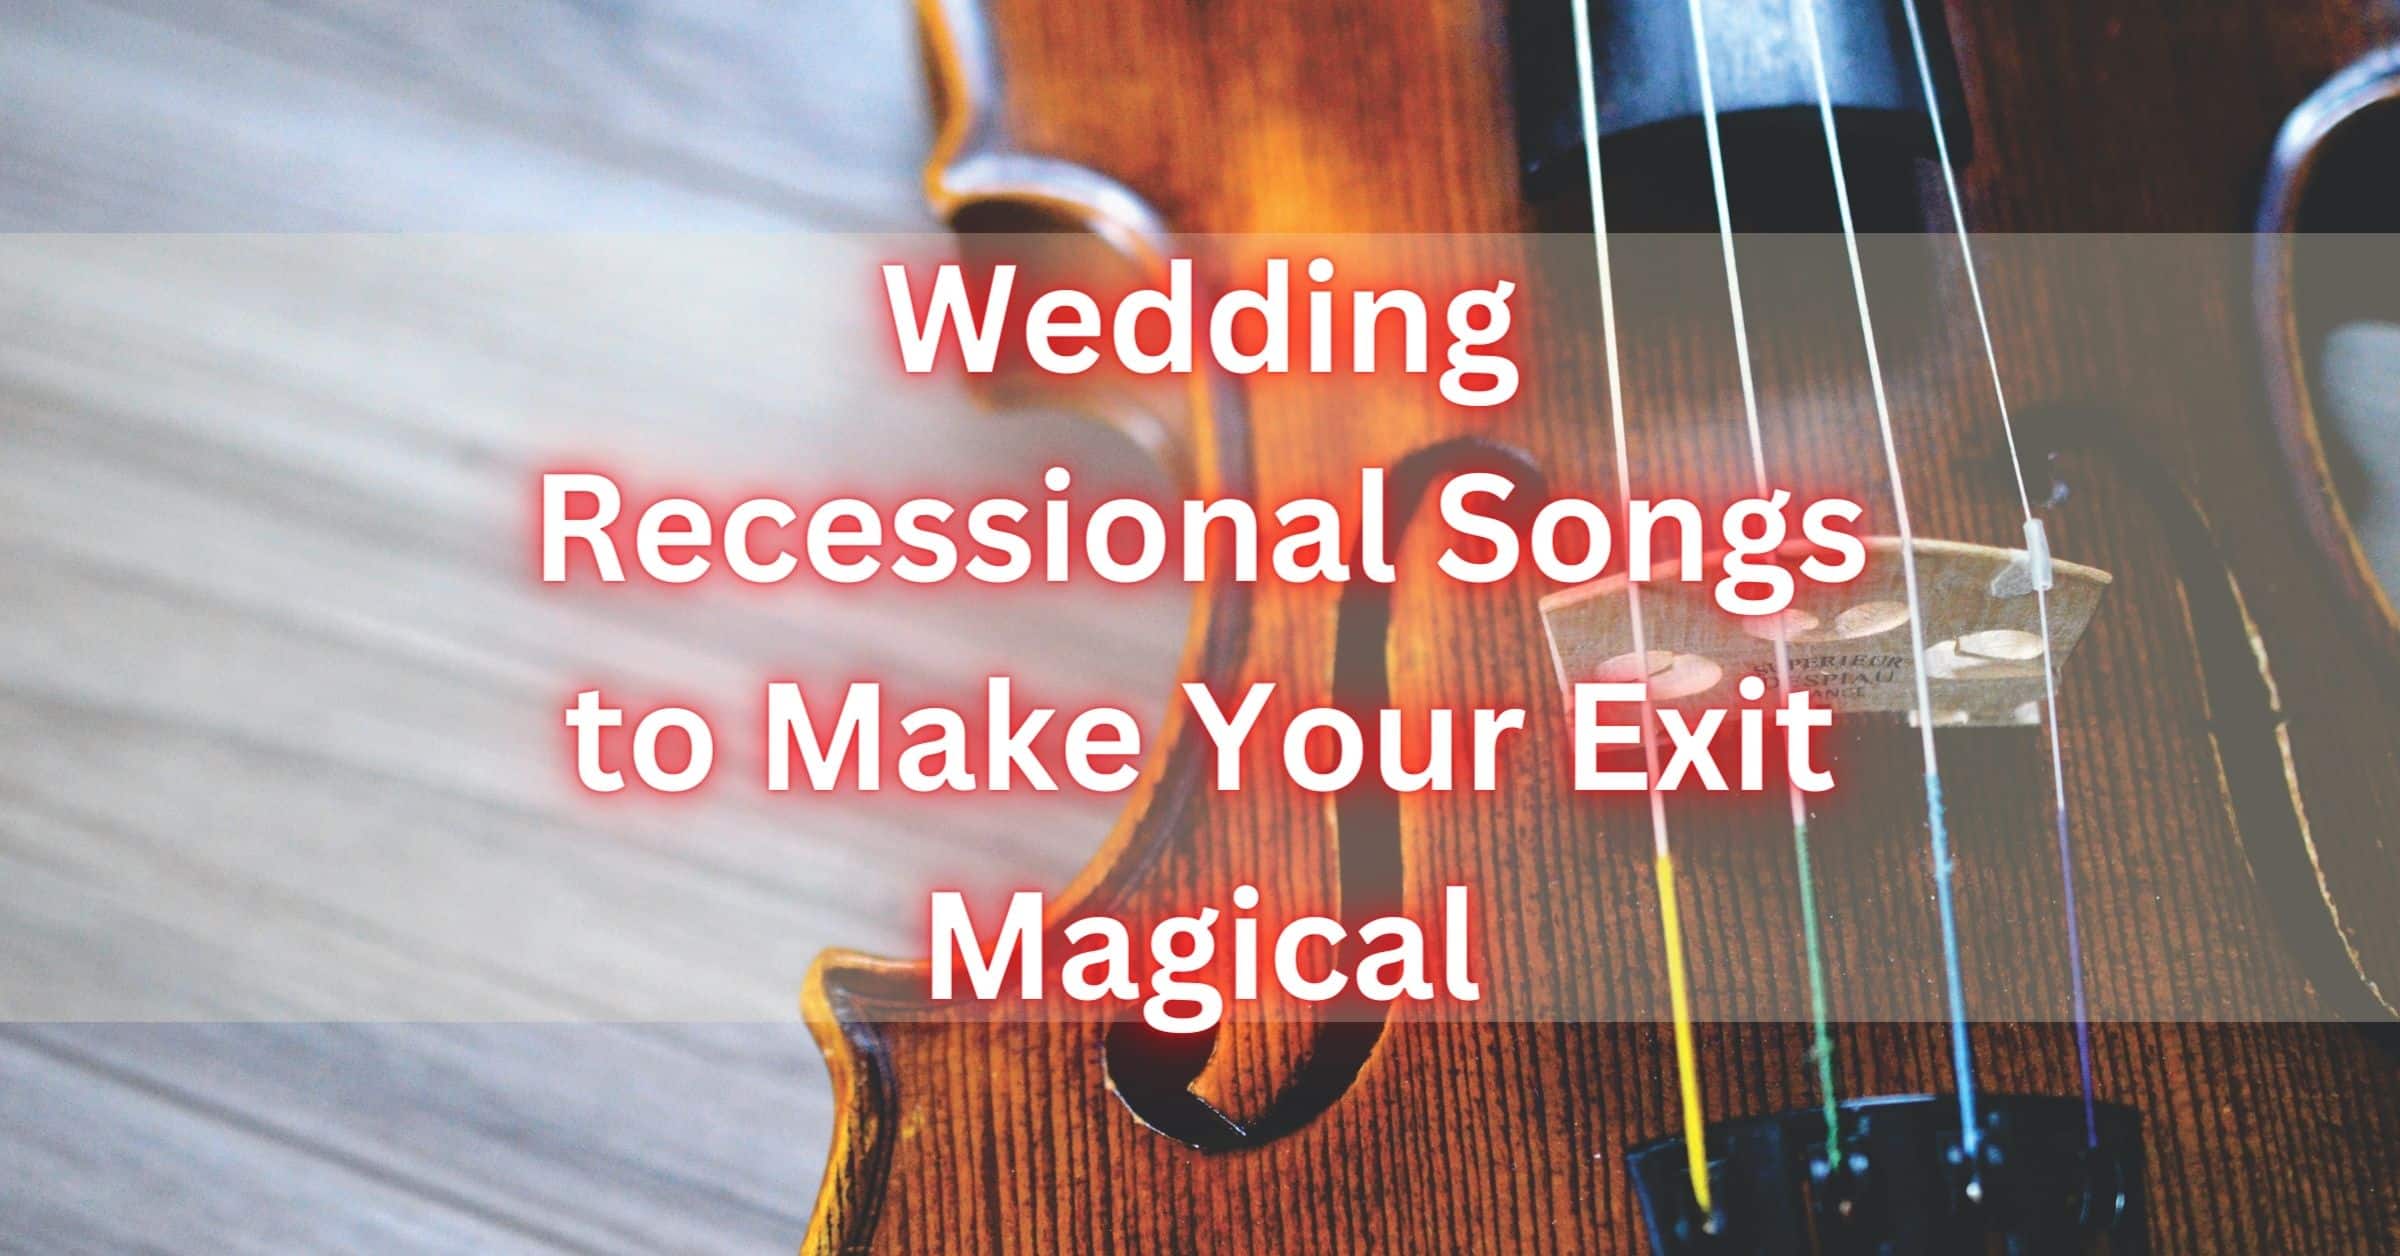 35 Best Wedding Recessional Songs To Make Your Exit Magical